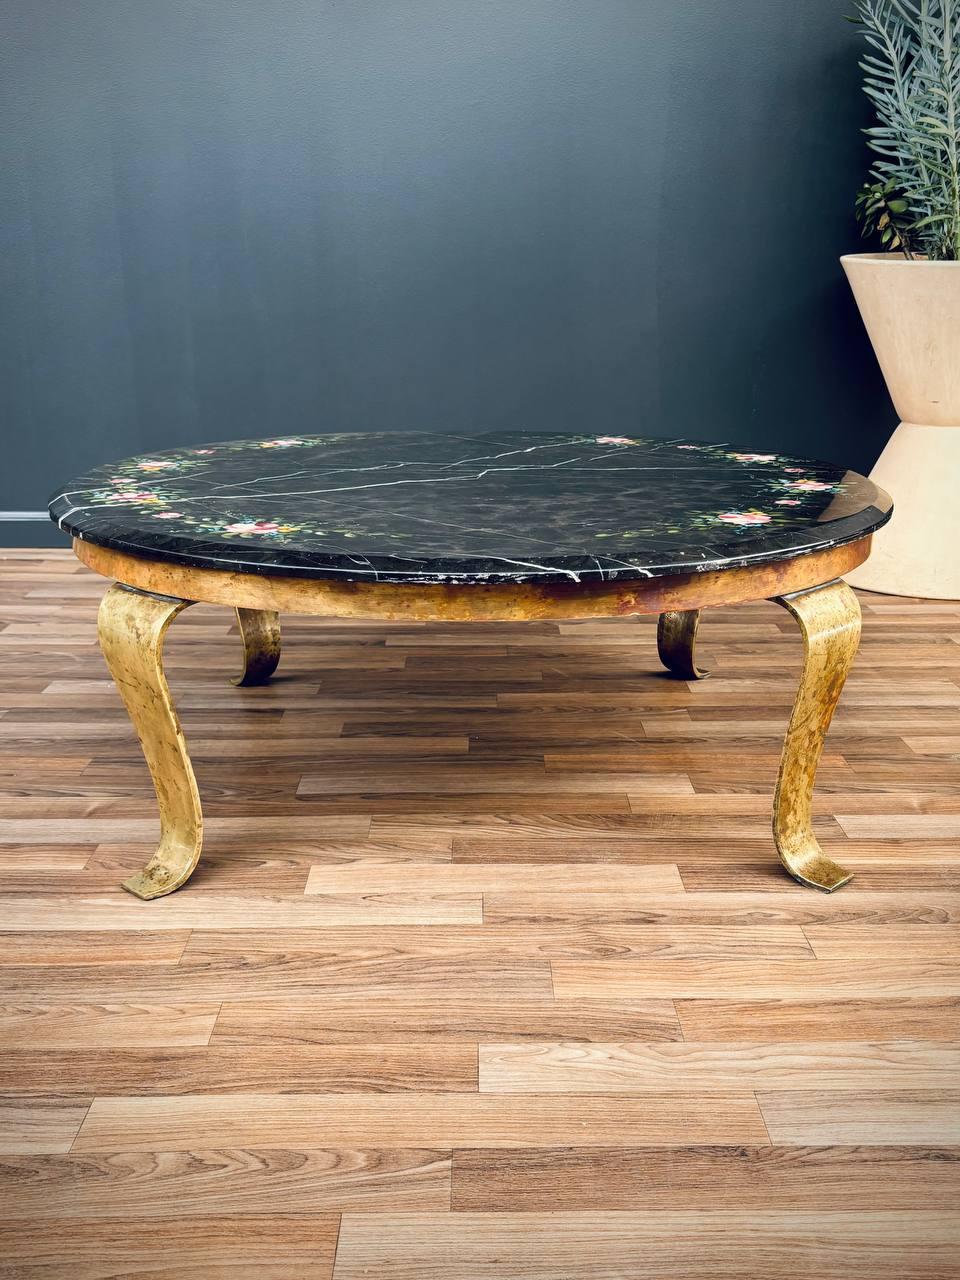 Regency Arturo Pani Painted Onyx & Brass Coffee Table for Guy Muller For Sale